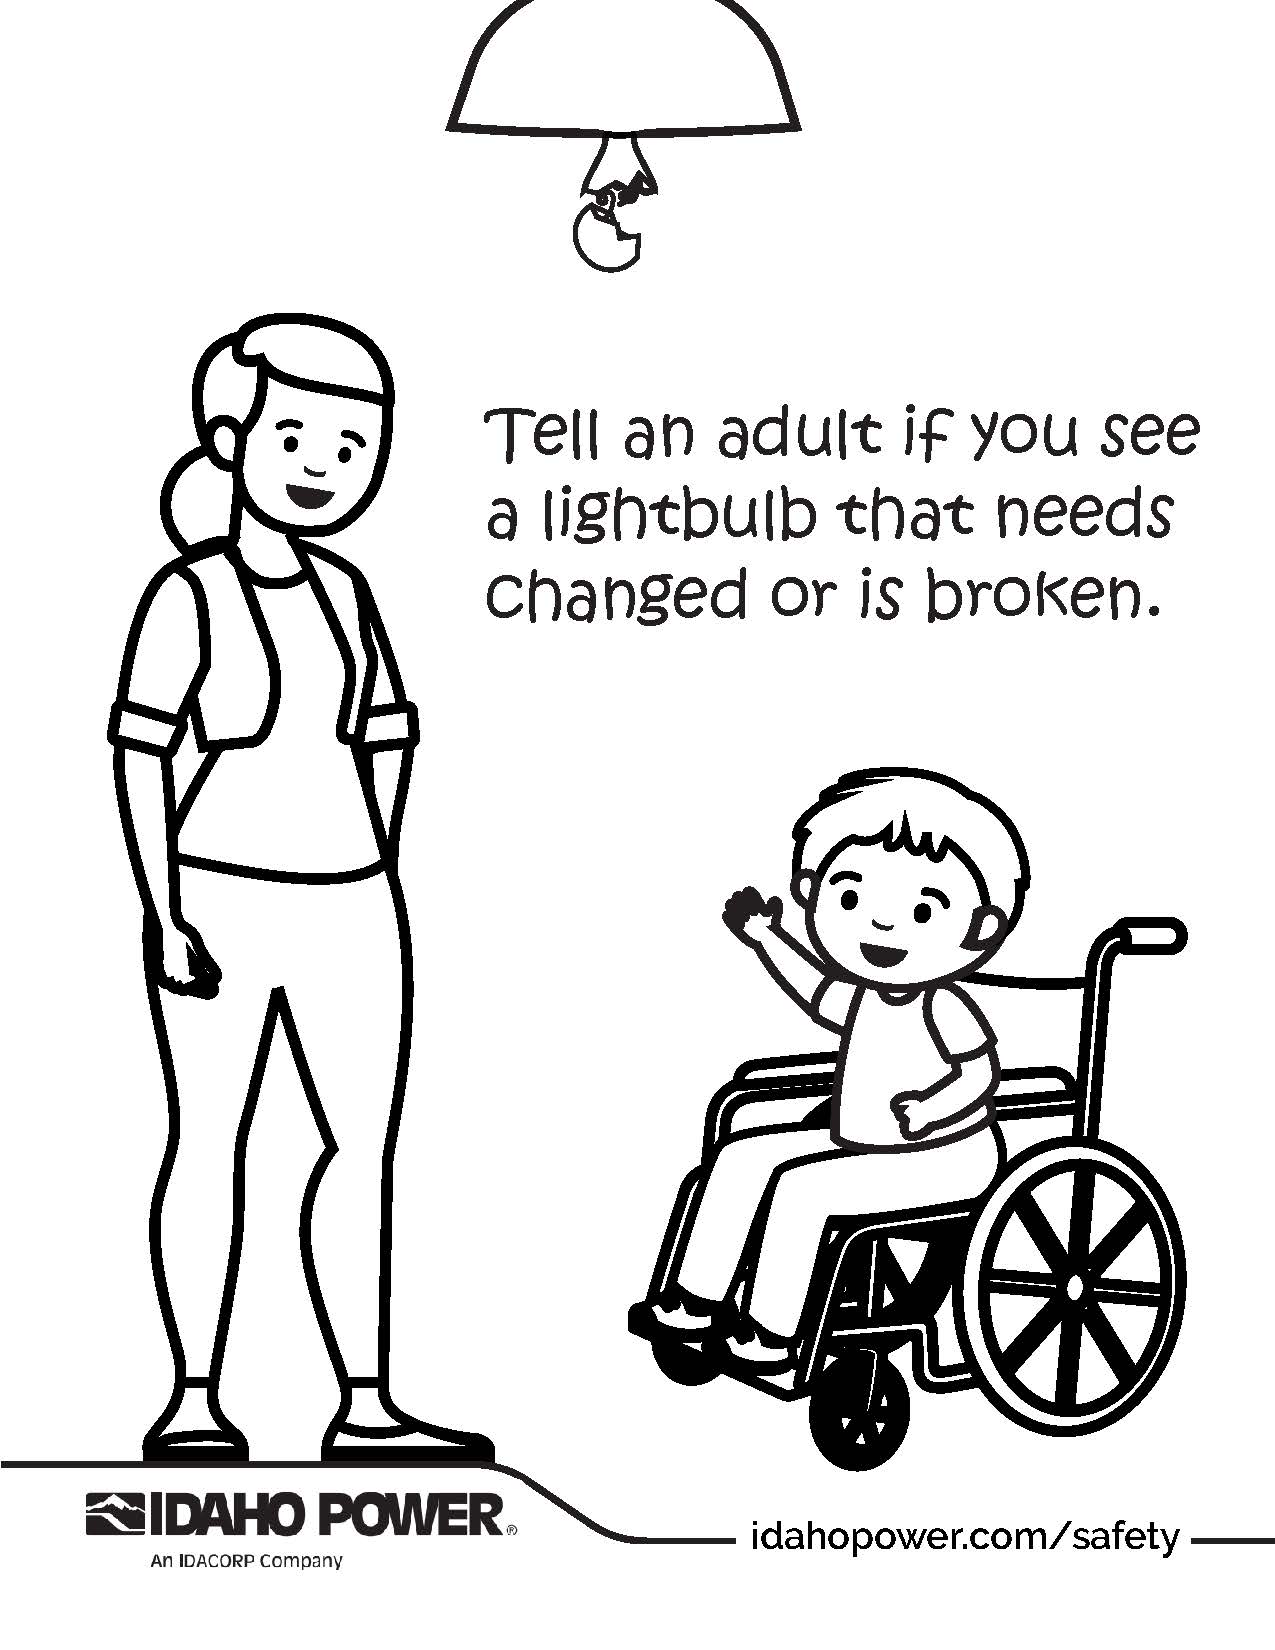 Coloring page of a boy and woman that says, Tell an adult if you see a lightbulb that needs changed or is broken